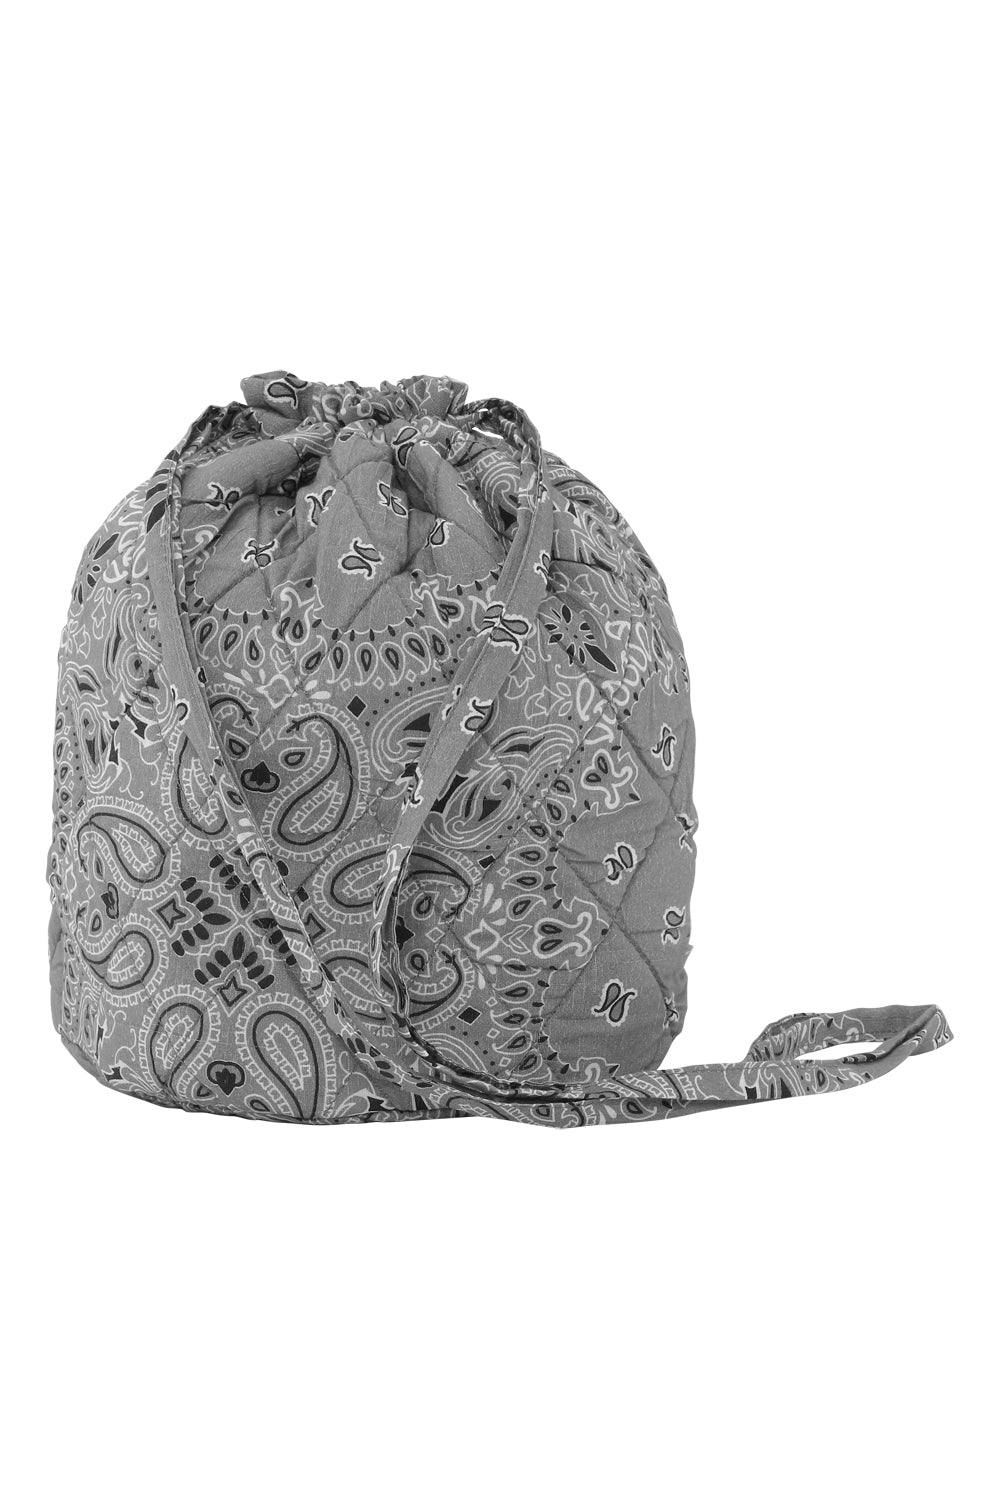 ANASTASIA - QUILTED COTTON - BAG - GRAY 